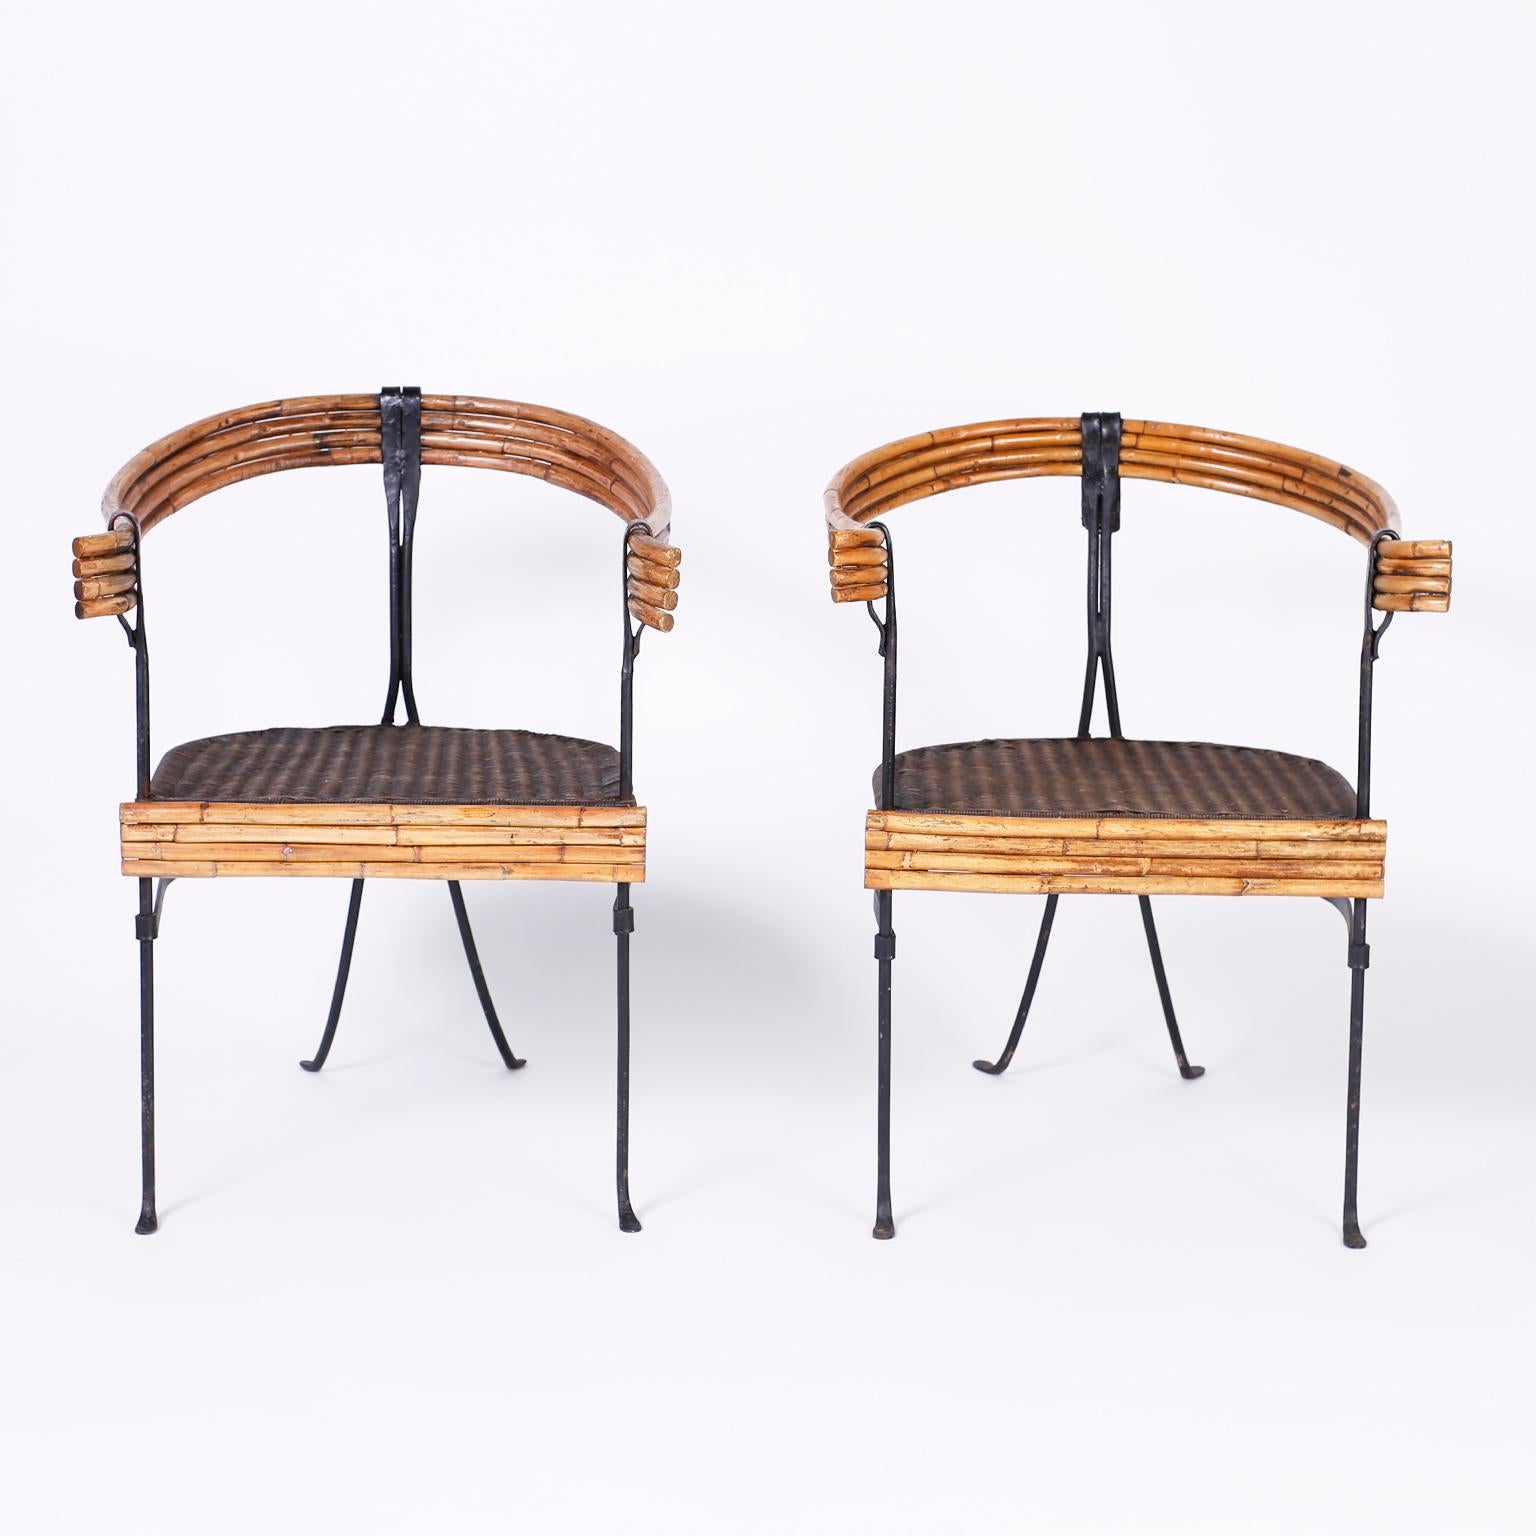 Pair of sculptural Minimalist midcentury armchairs with handwrought iron frames, bamboo skirt, bent bamboo back and arms and a woven caned seat.